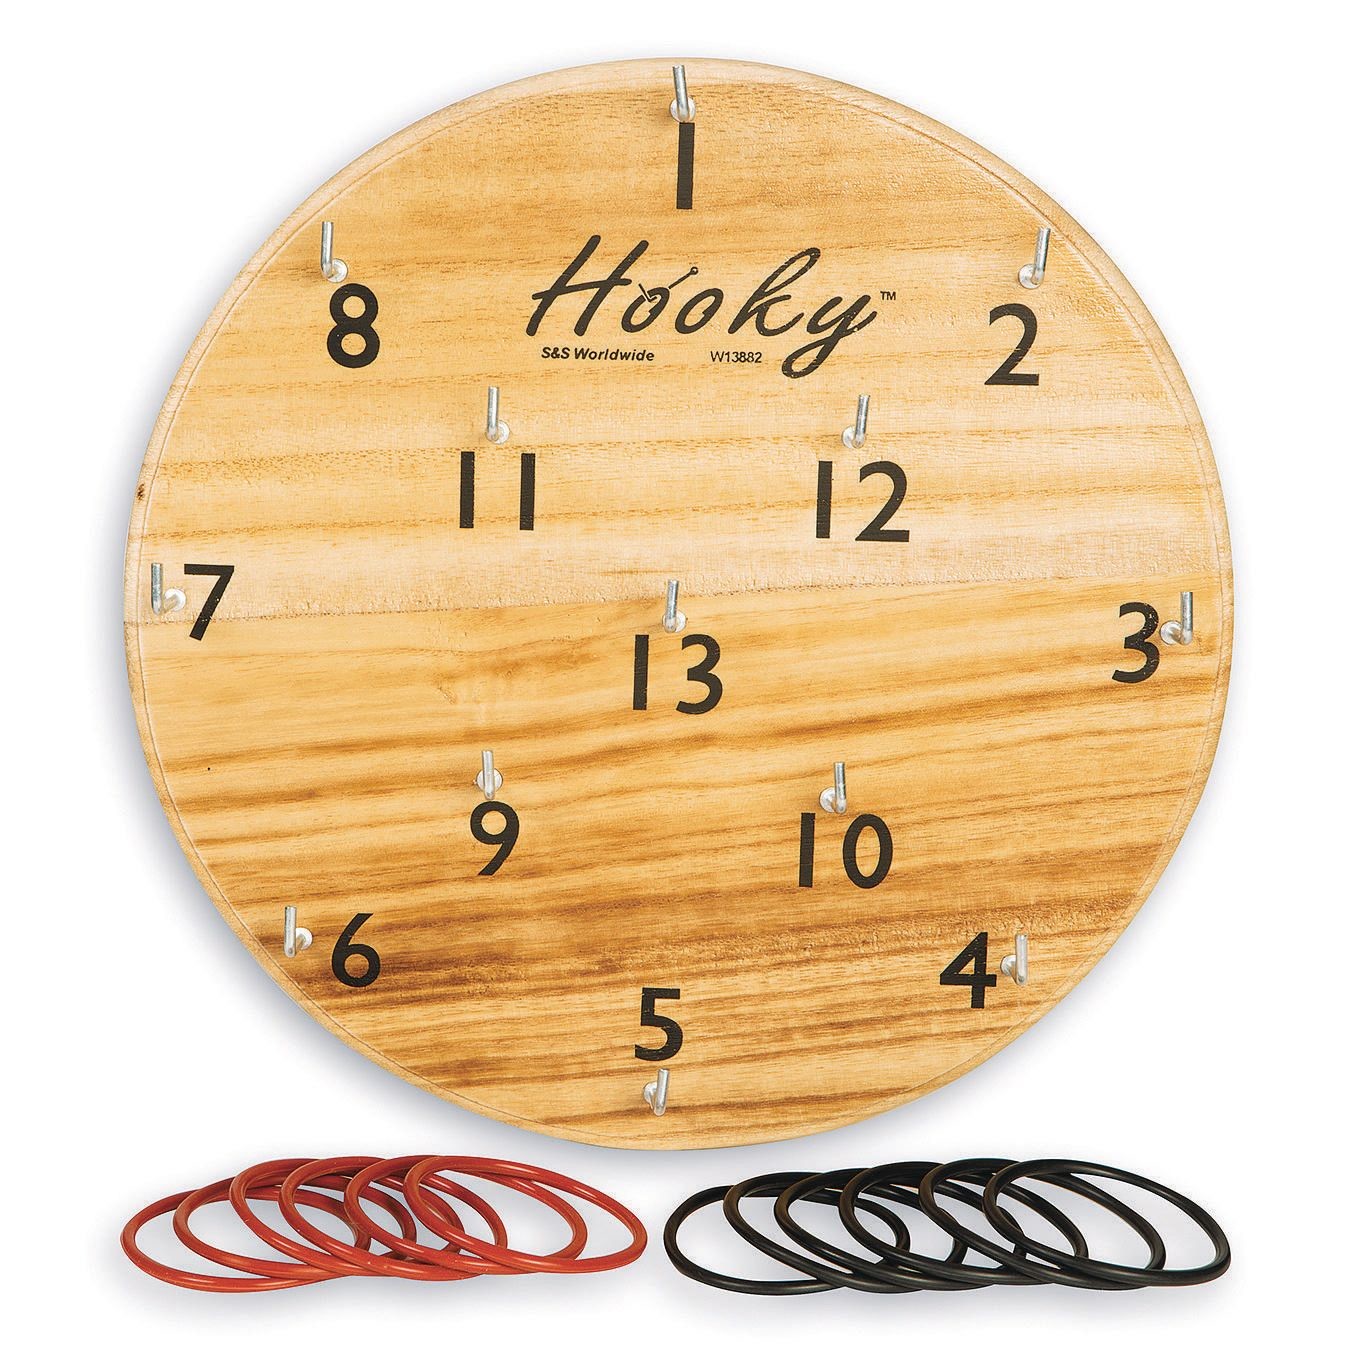 Buy Hooky Game at S&S Worldwide